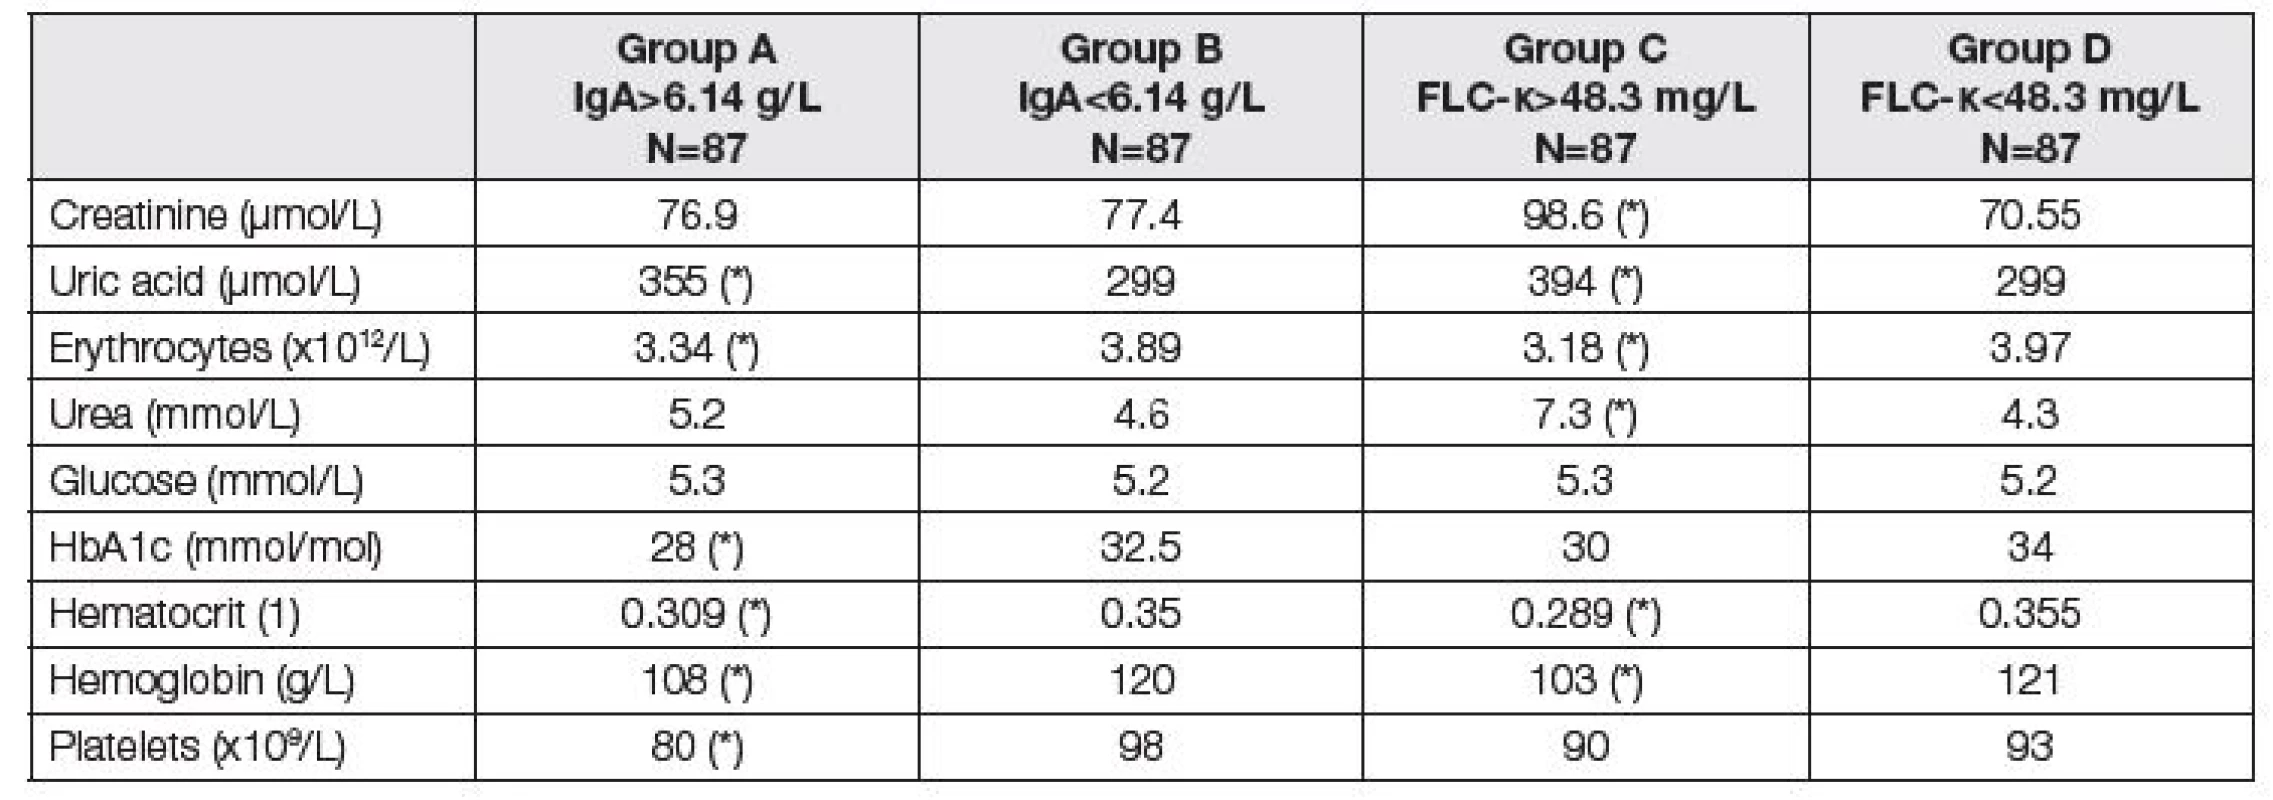 Medians of parameters of renal function and liver fibrosis before LTx. Comparison of two subgroups with respect
to different criteria. Groups A and B according to the total IgA; group A above median of 6.14 g/L, group B up to median of
6.14 g/L. Groups C and D according to the FLC-κ; group C above median of 48.3 mg/L, group D up to median of 48.3 mg/L).
Asterisk (*) means significant difference between group A and B, or C and D, respectively (Mann-Whitney test).